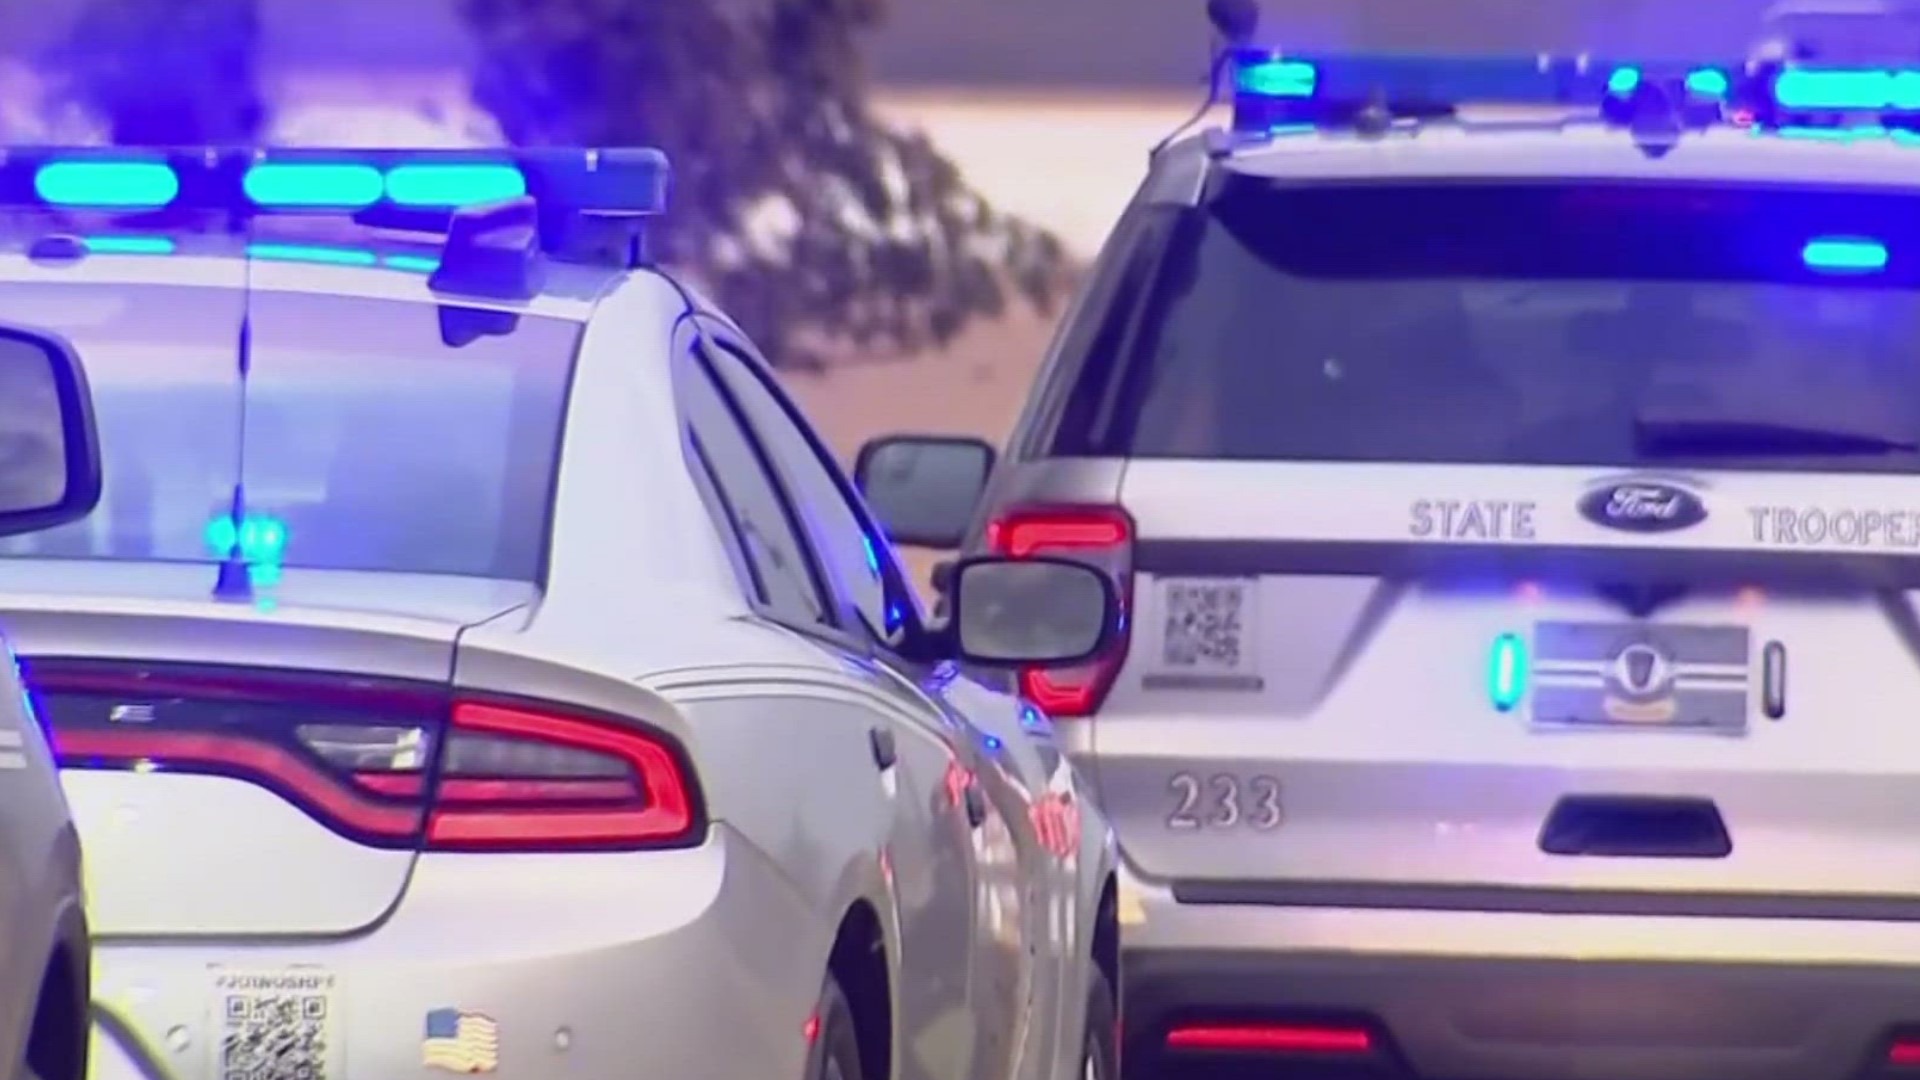 Two people, including a Preble County sheriff’s deputy, are dead after crashing head-on early Monday morning, according to the Ohio State Highway Patrol.